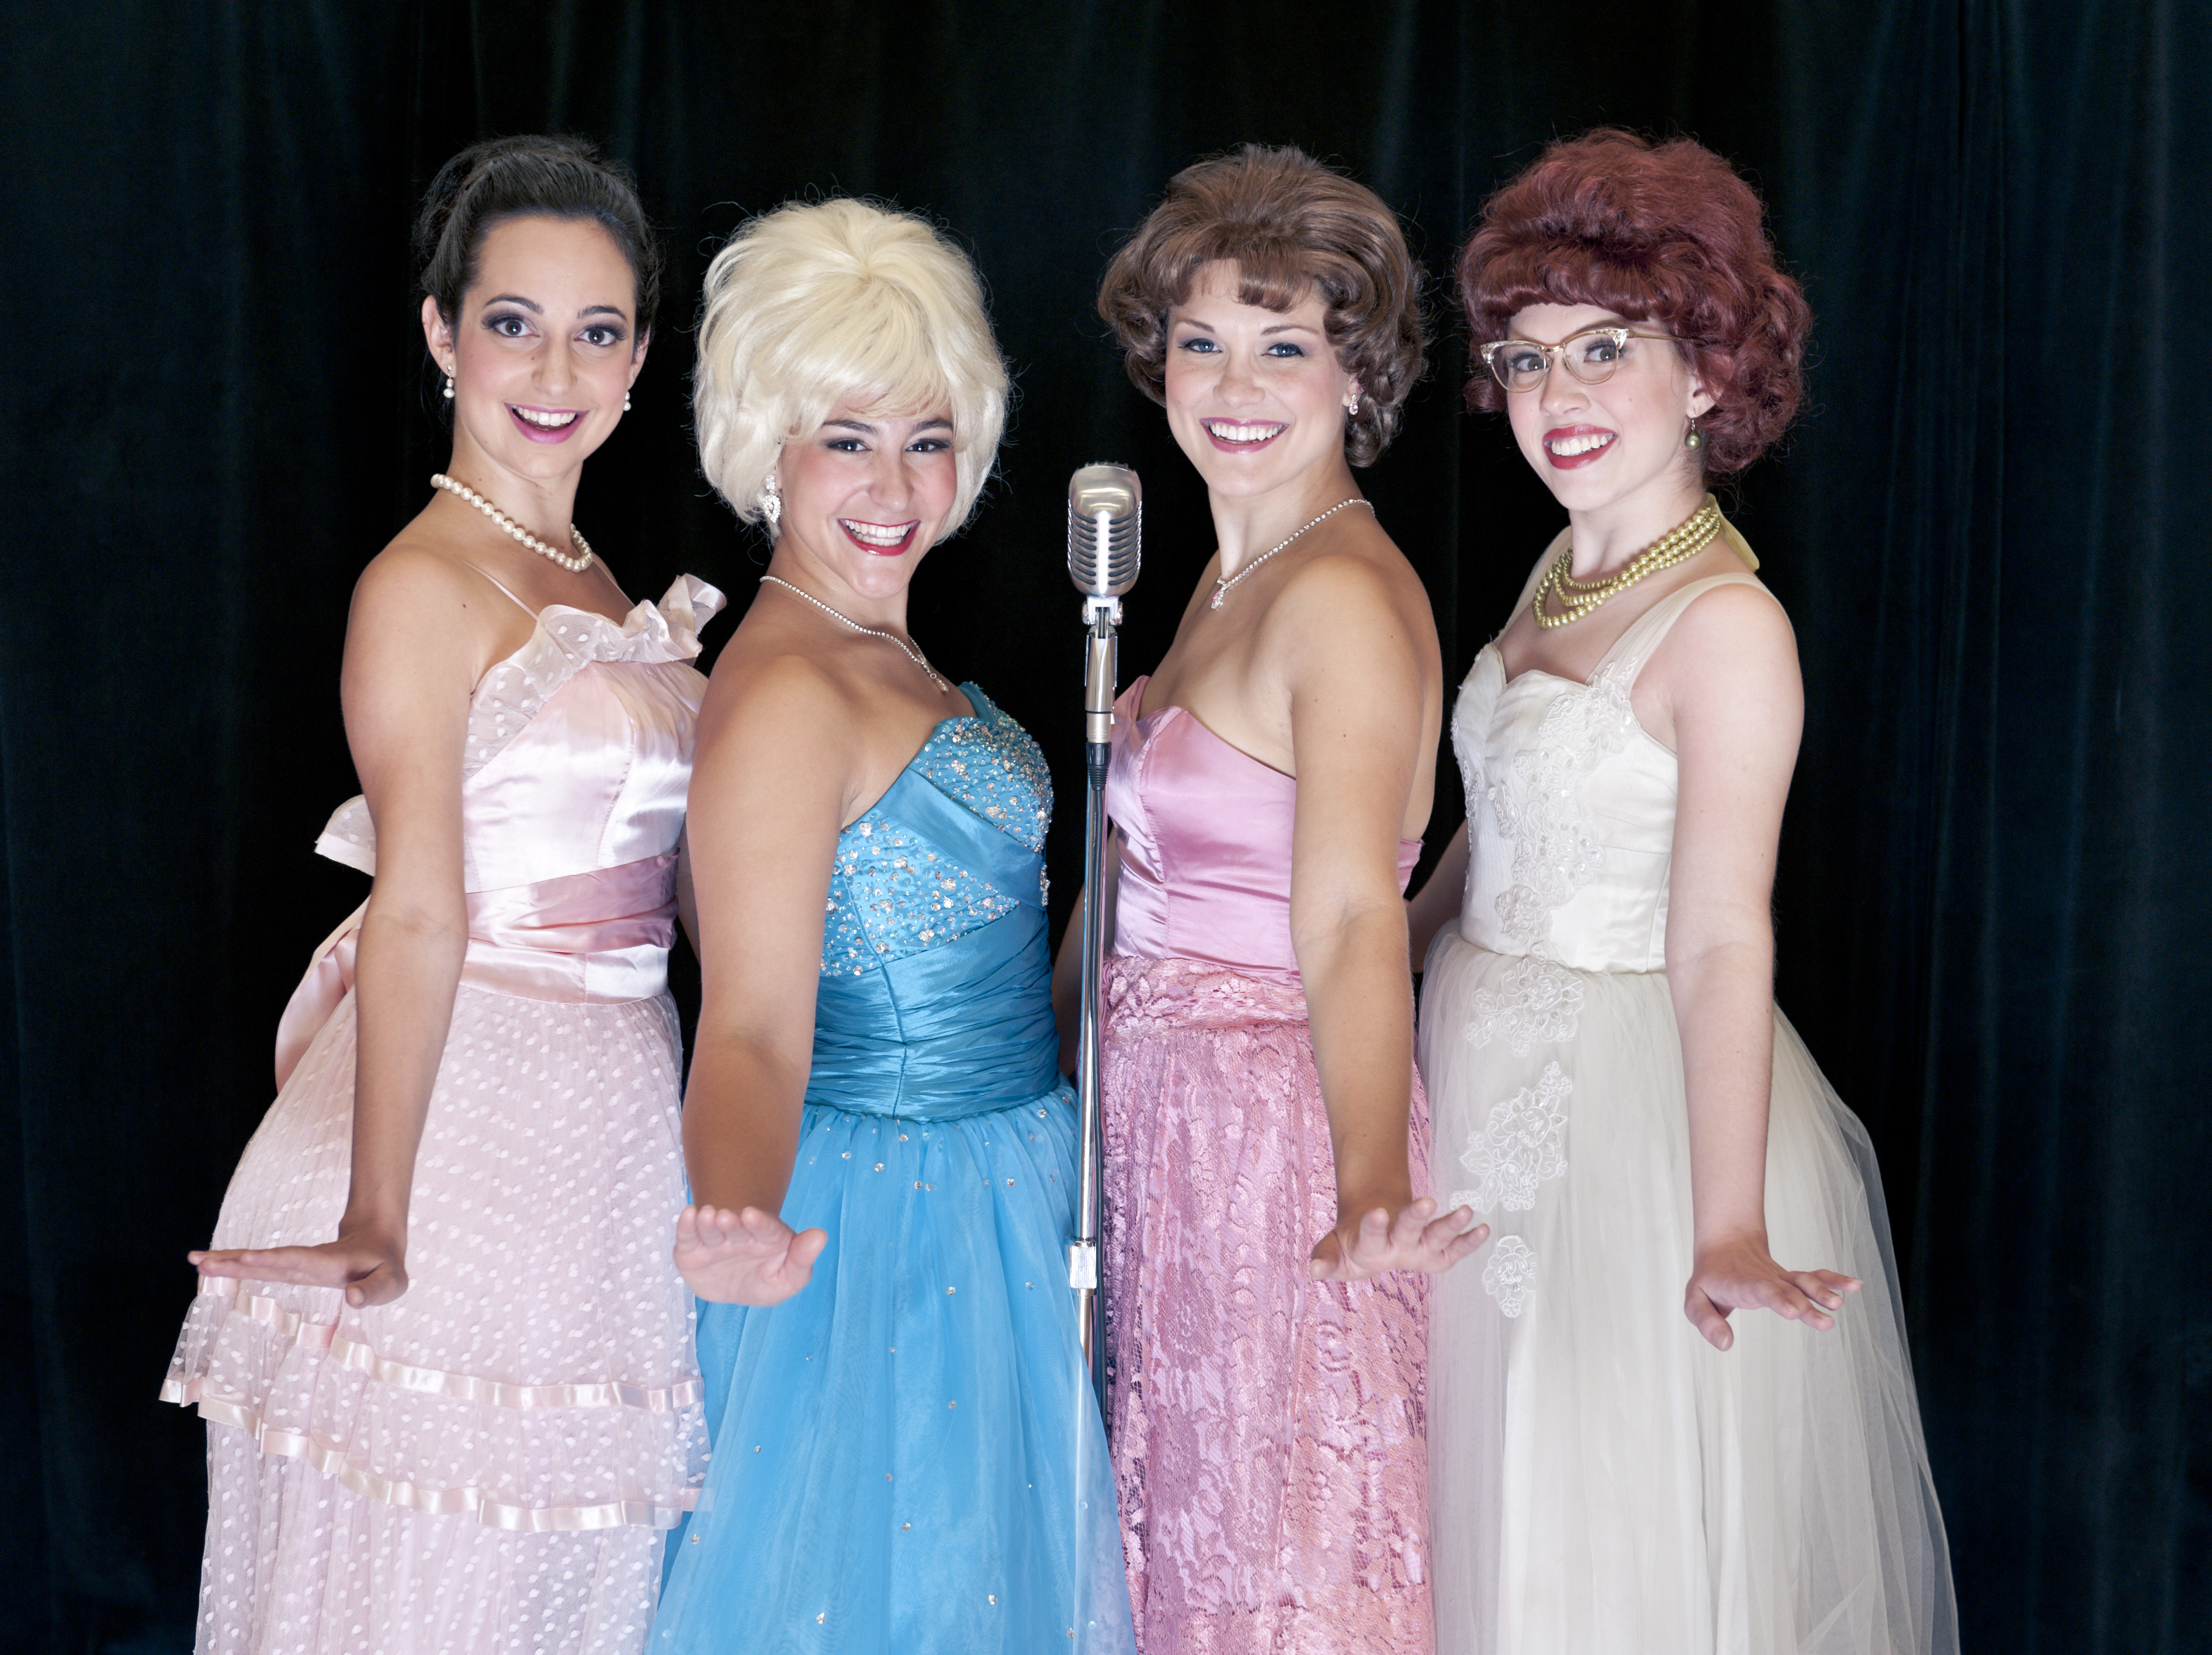 Betty Jean (Ali Stoner), Suzy (Emily Via), Cindy Lou (Emelie Faith Thompson), and Missy (Carly Hueston Amburn) stand at a microphone preparing to sing